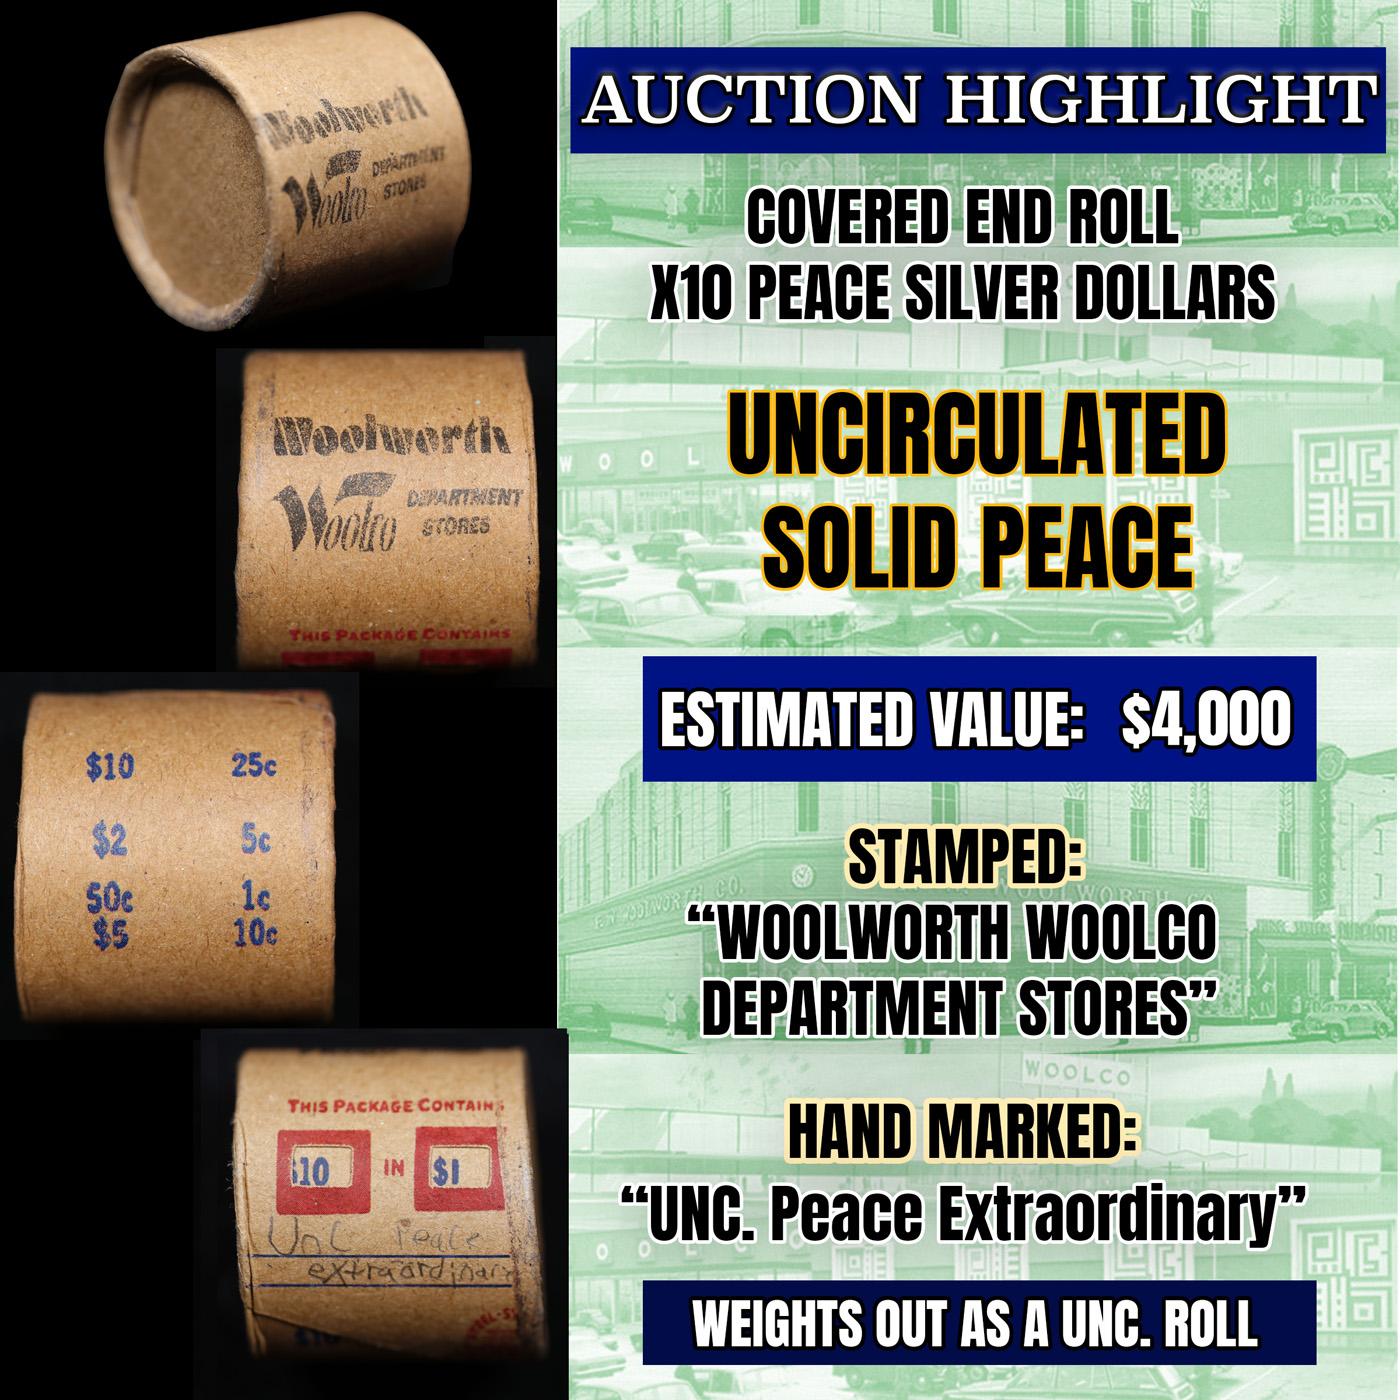 *EXCLUSIVE* Hand Marked "Unc Peace Extraordinary," x20 coin Covered End Roll! - Huge Vault Hoard  (F